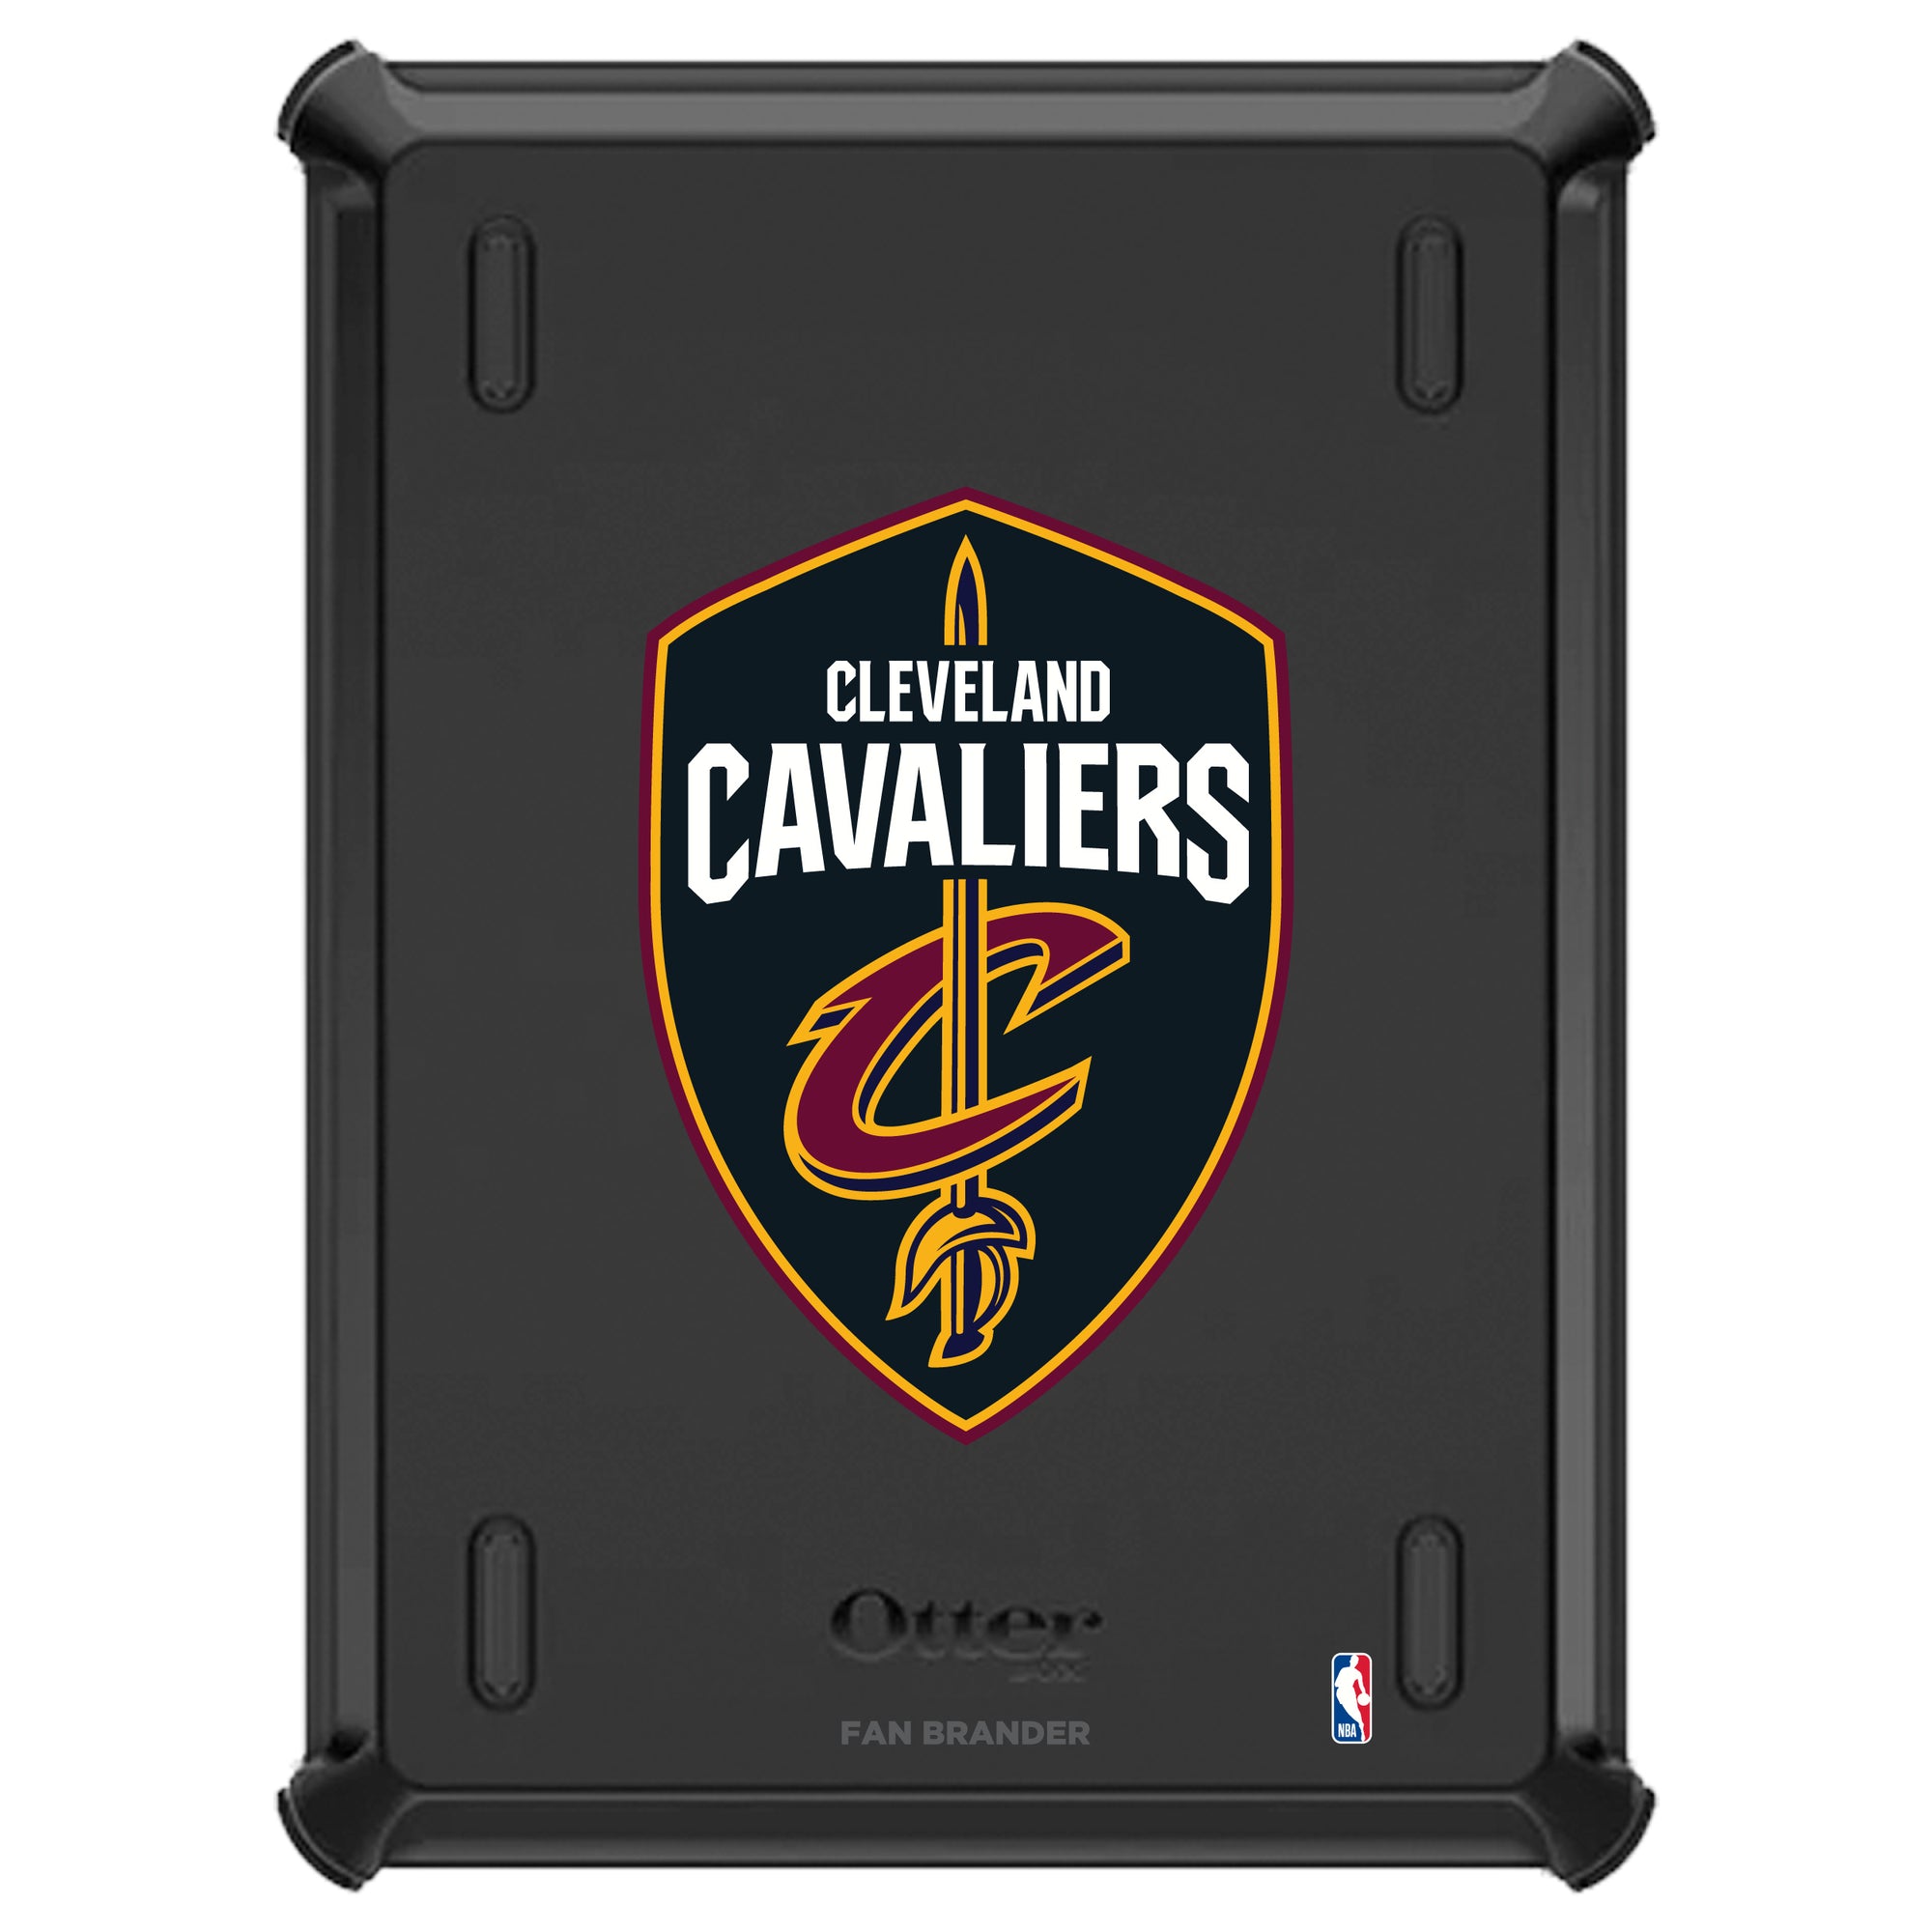 Cleveland Cavaliers iPad (5th and 6th gen) Otterbox Defender Series Case